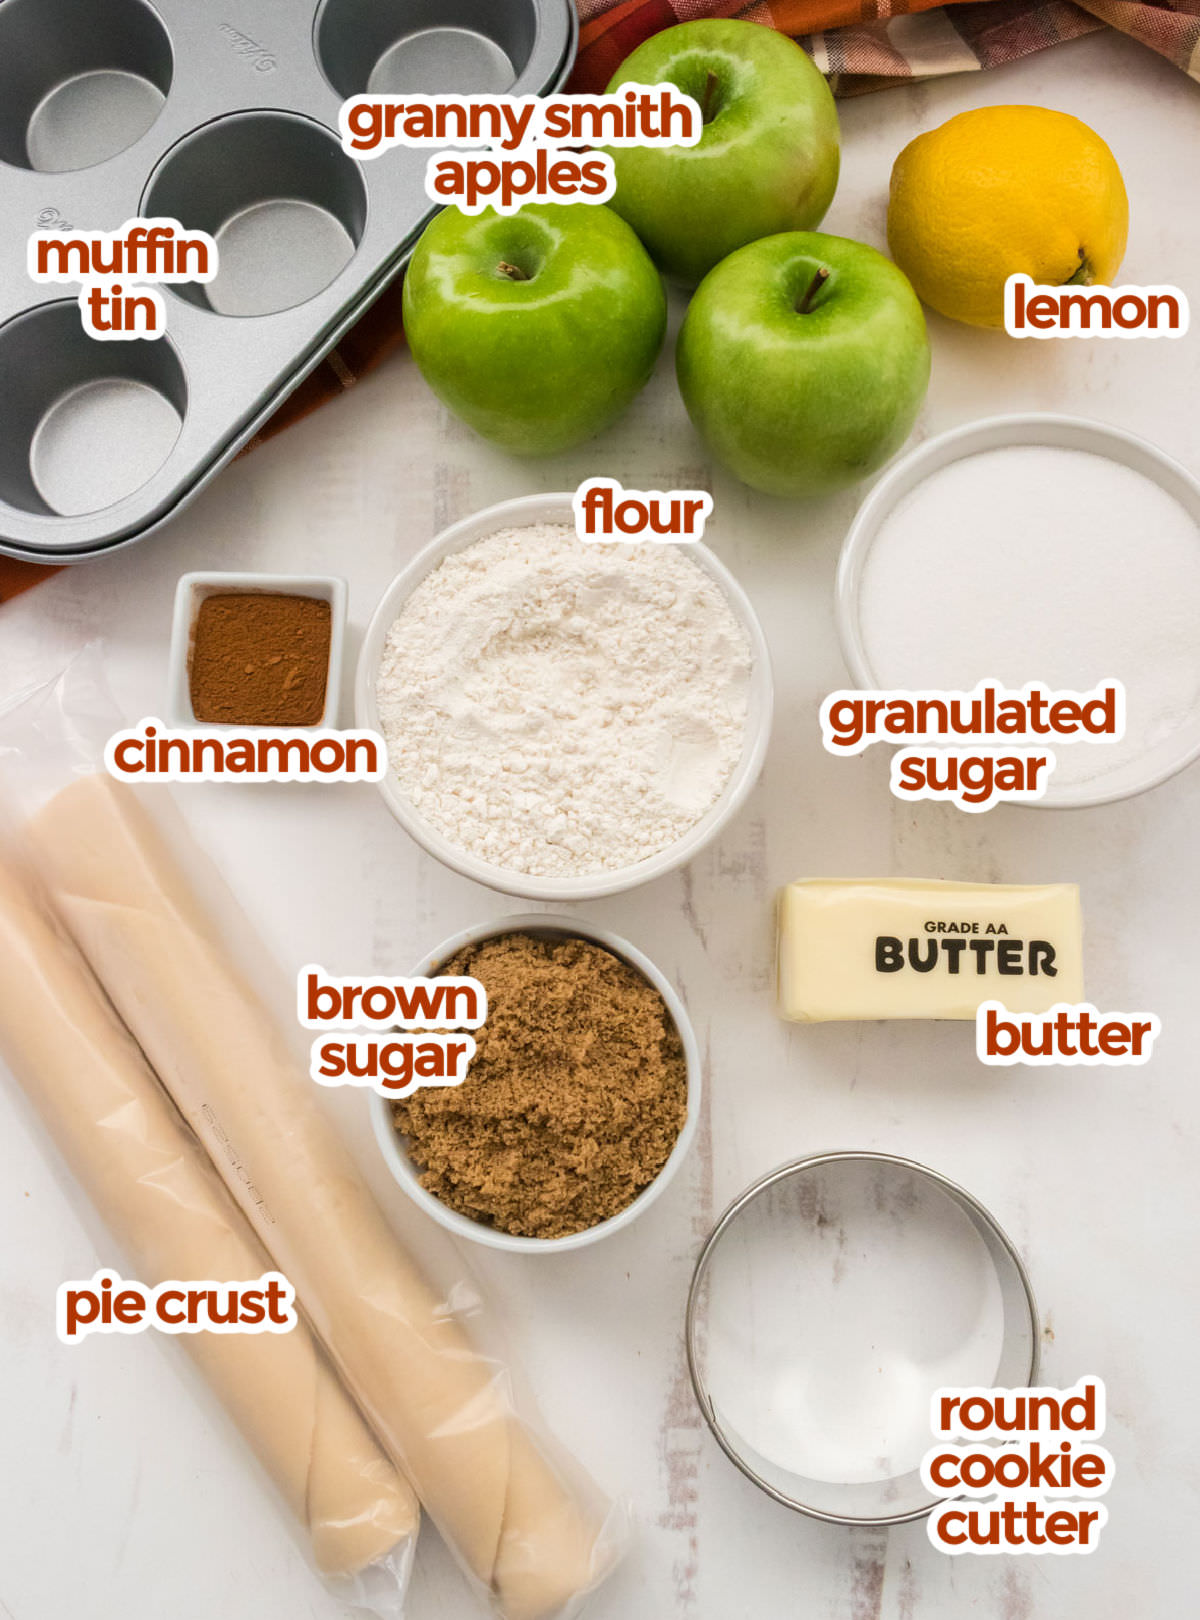 All the ingredients you will need to make Mini Apple Pies including Granny Smith Apples, lemon, flour. granulated sugar, cinnamon butter, brown sugar and pie crust.